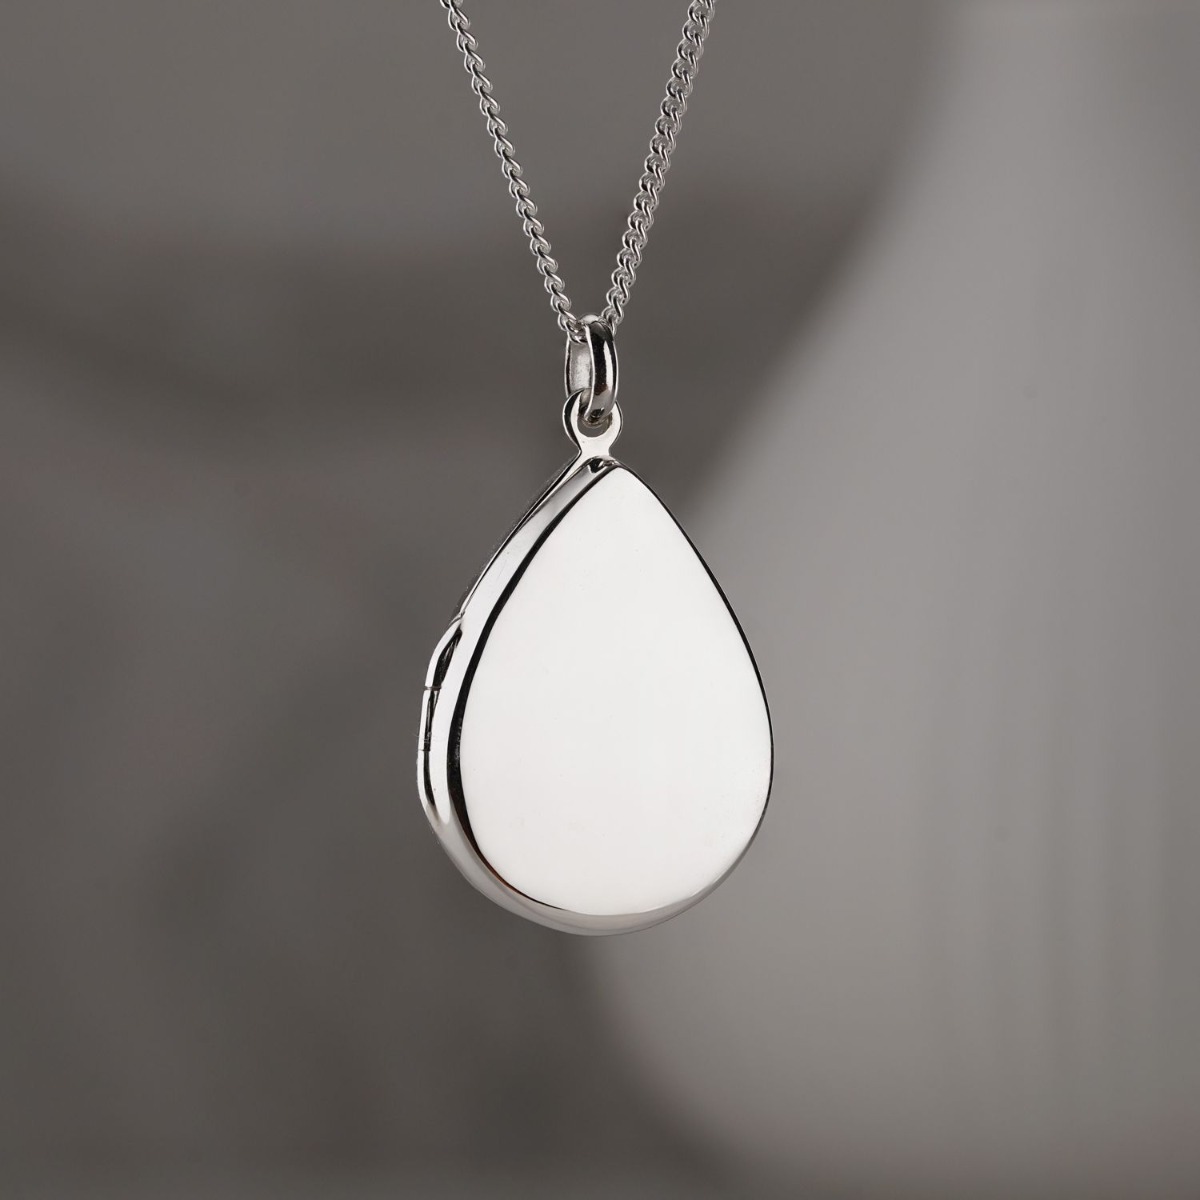 Sterling Silver Tear Drop Locket With Optional Free Engraving